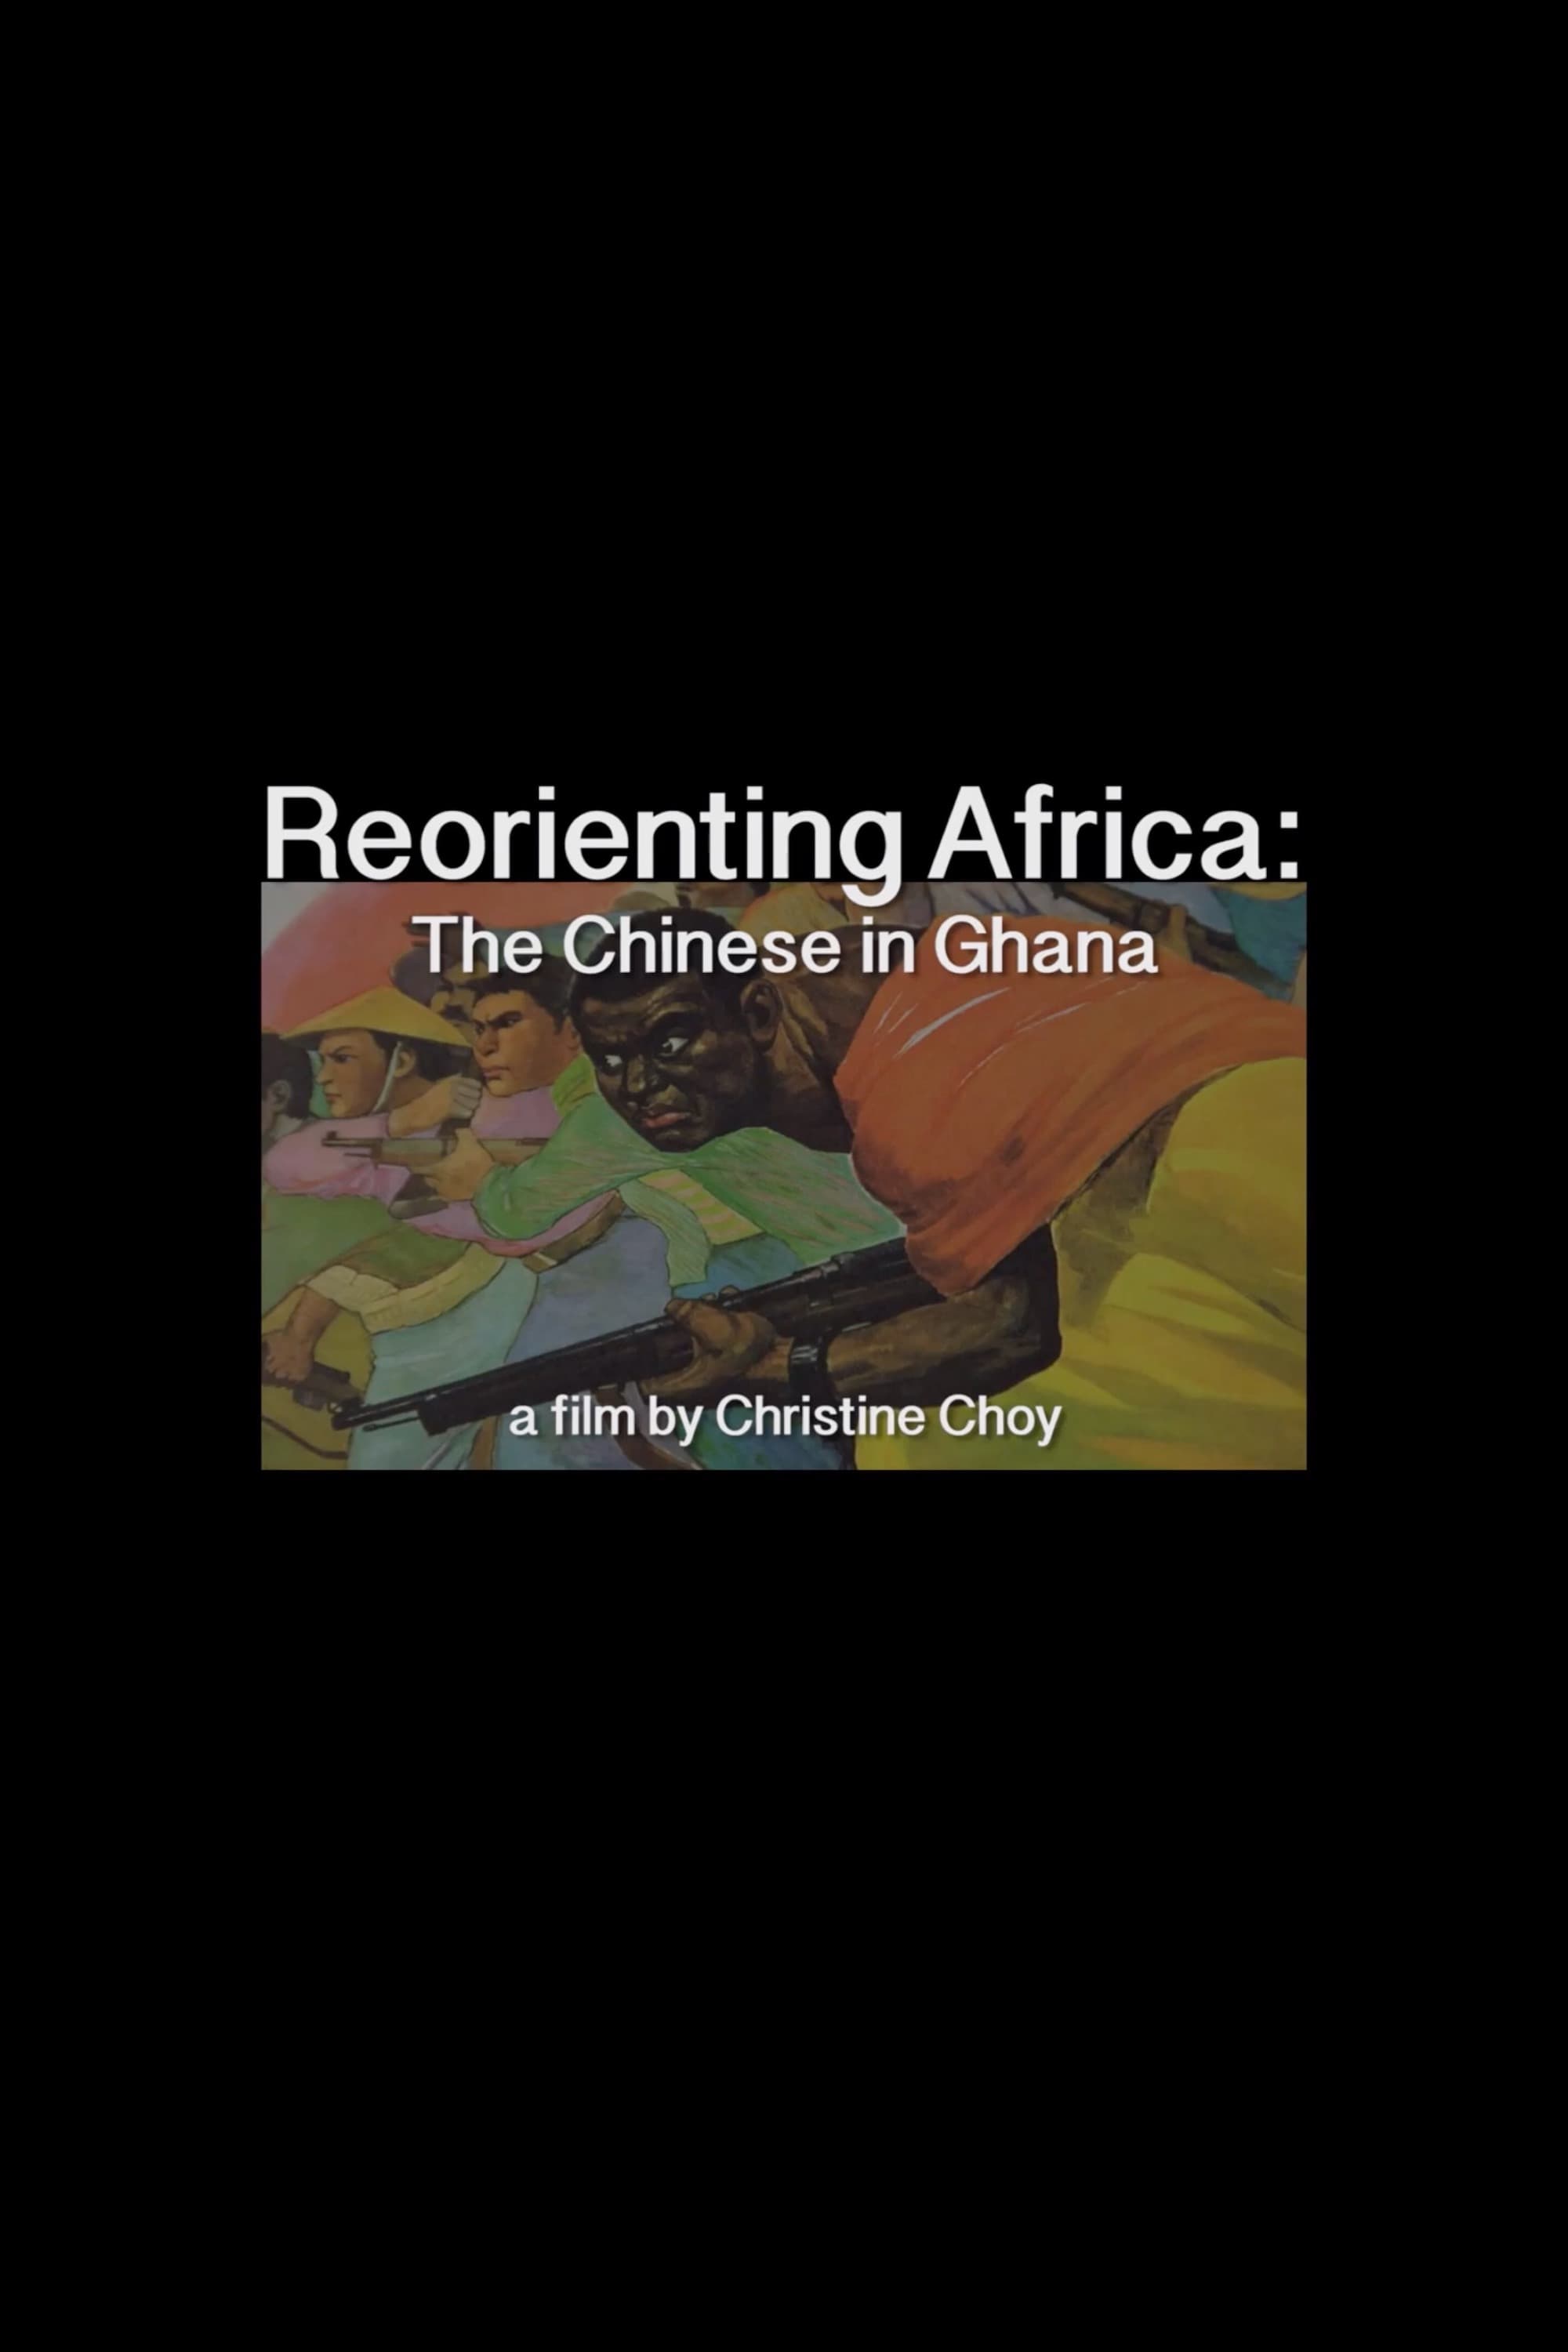 ReOrienting Africa: The Chinese in Ghana